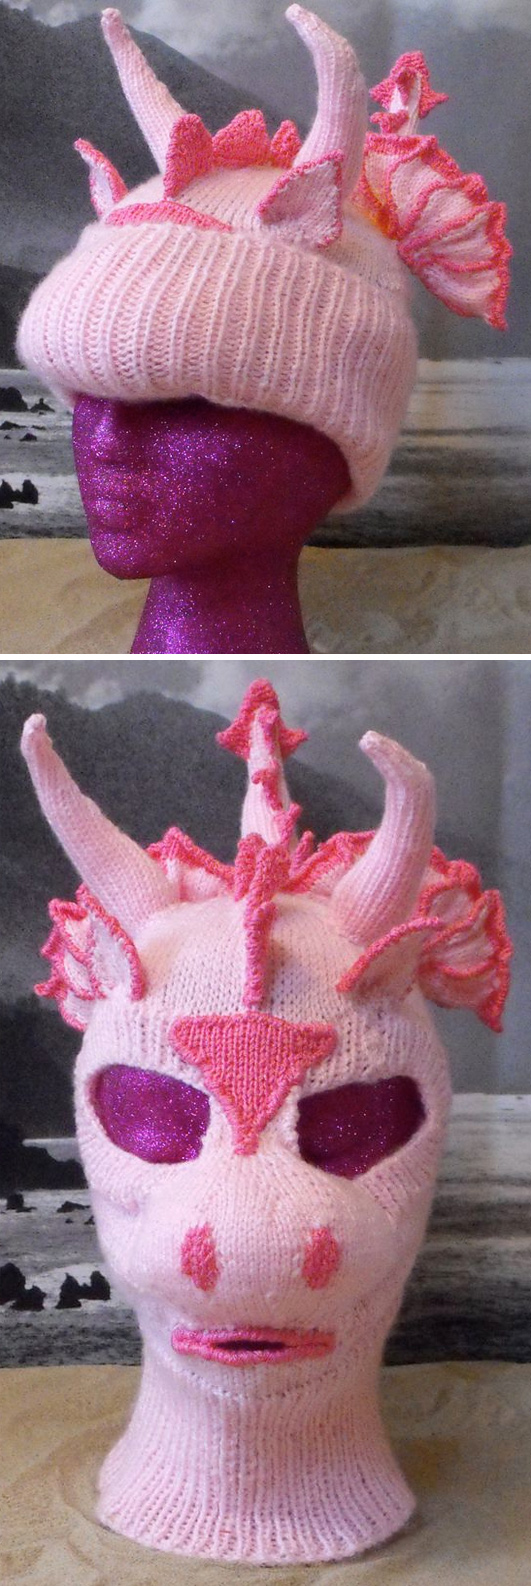 Knitting Pattern for Dragon Beanieclava - dragon hat that transforms to mask